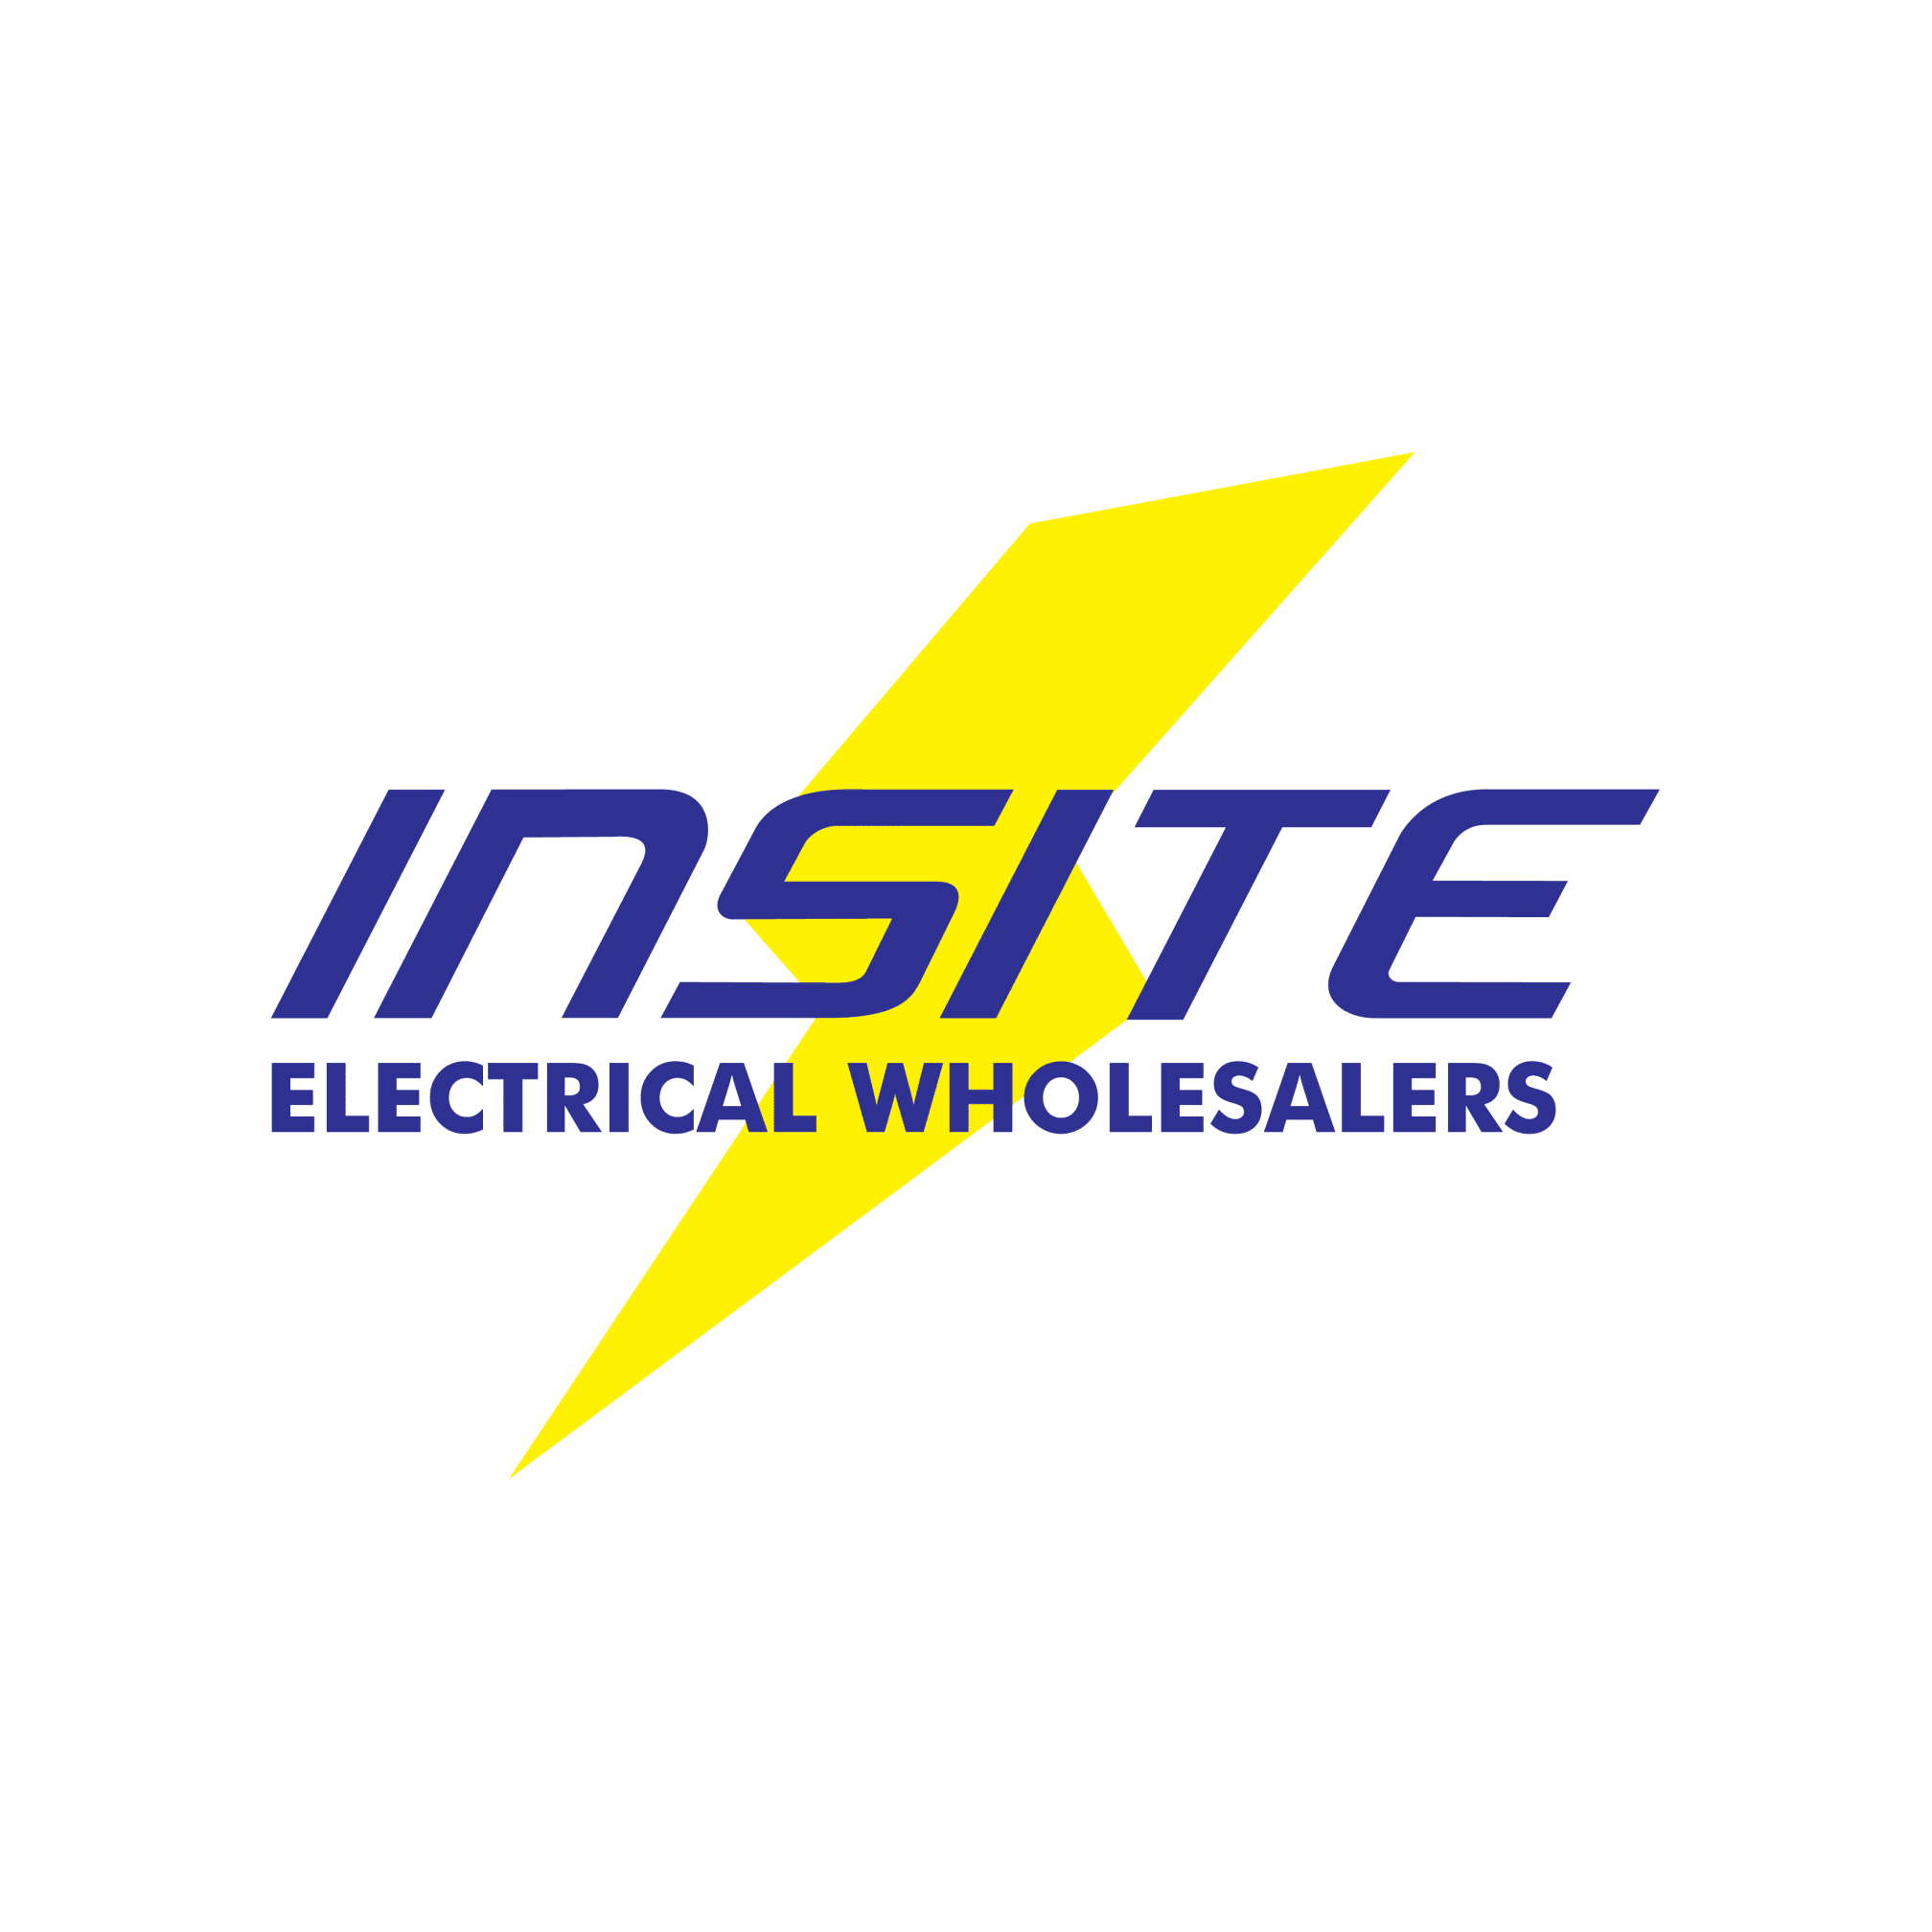 Insite Electrical Wholesalers - Daventry, Northamptonshire NN11 8PH - 01327 312930 | ShowMeLocal.com